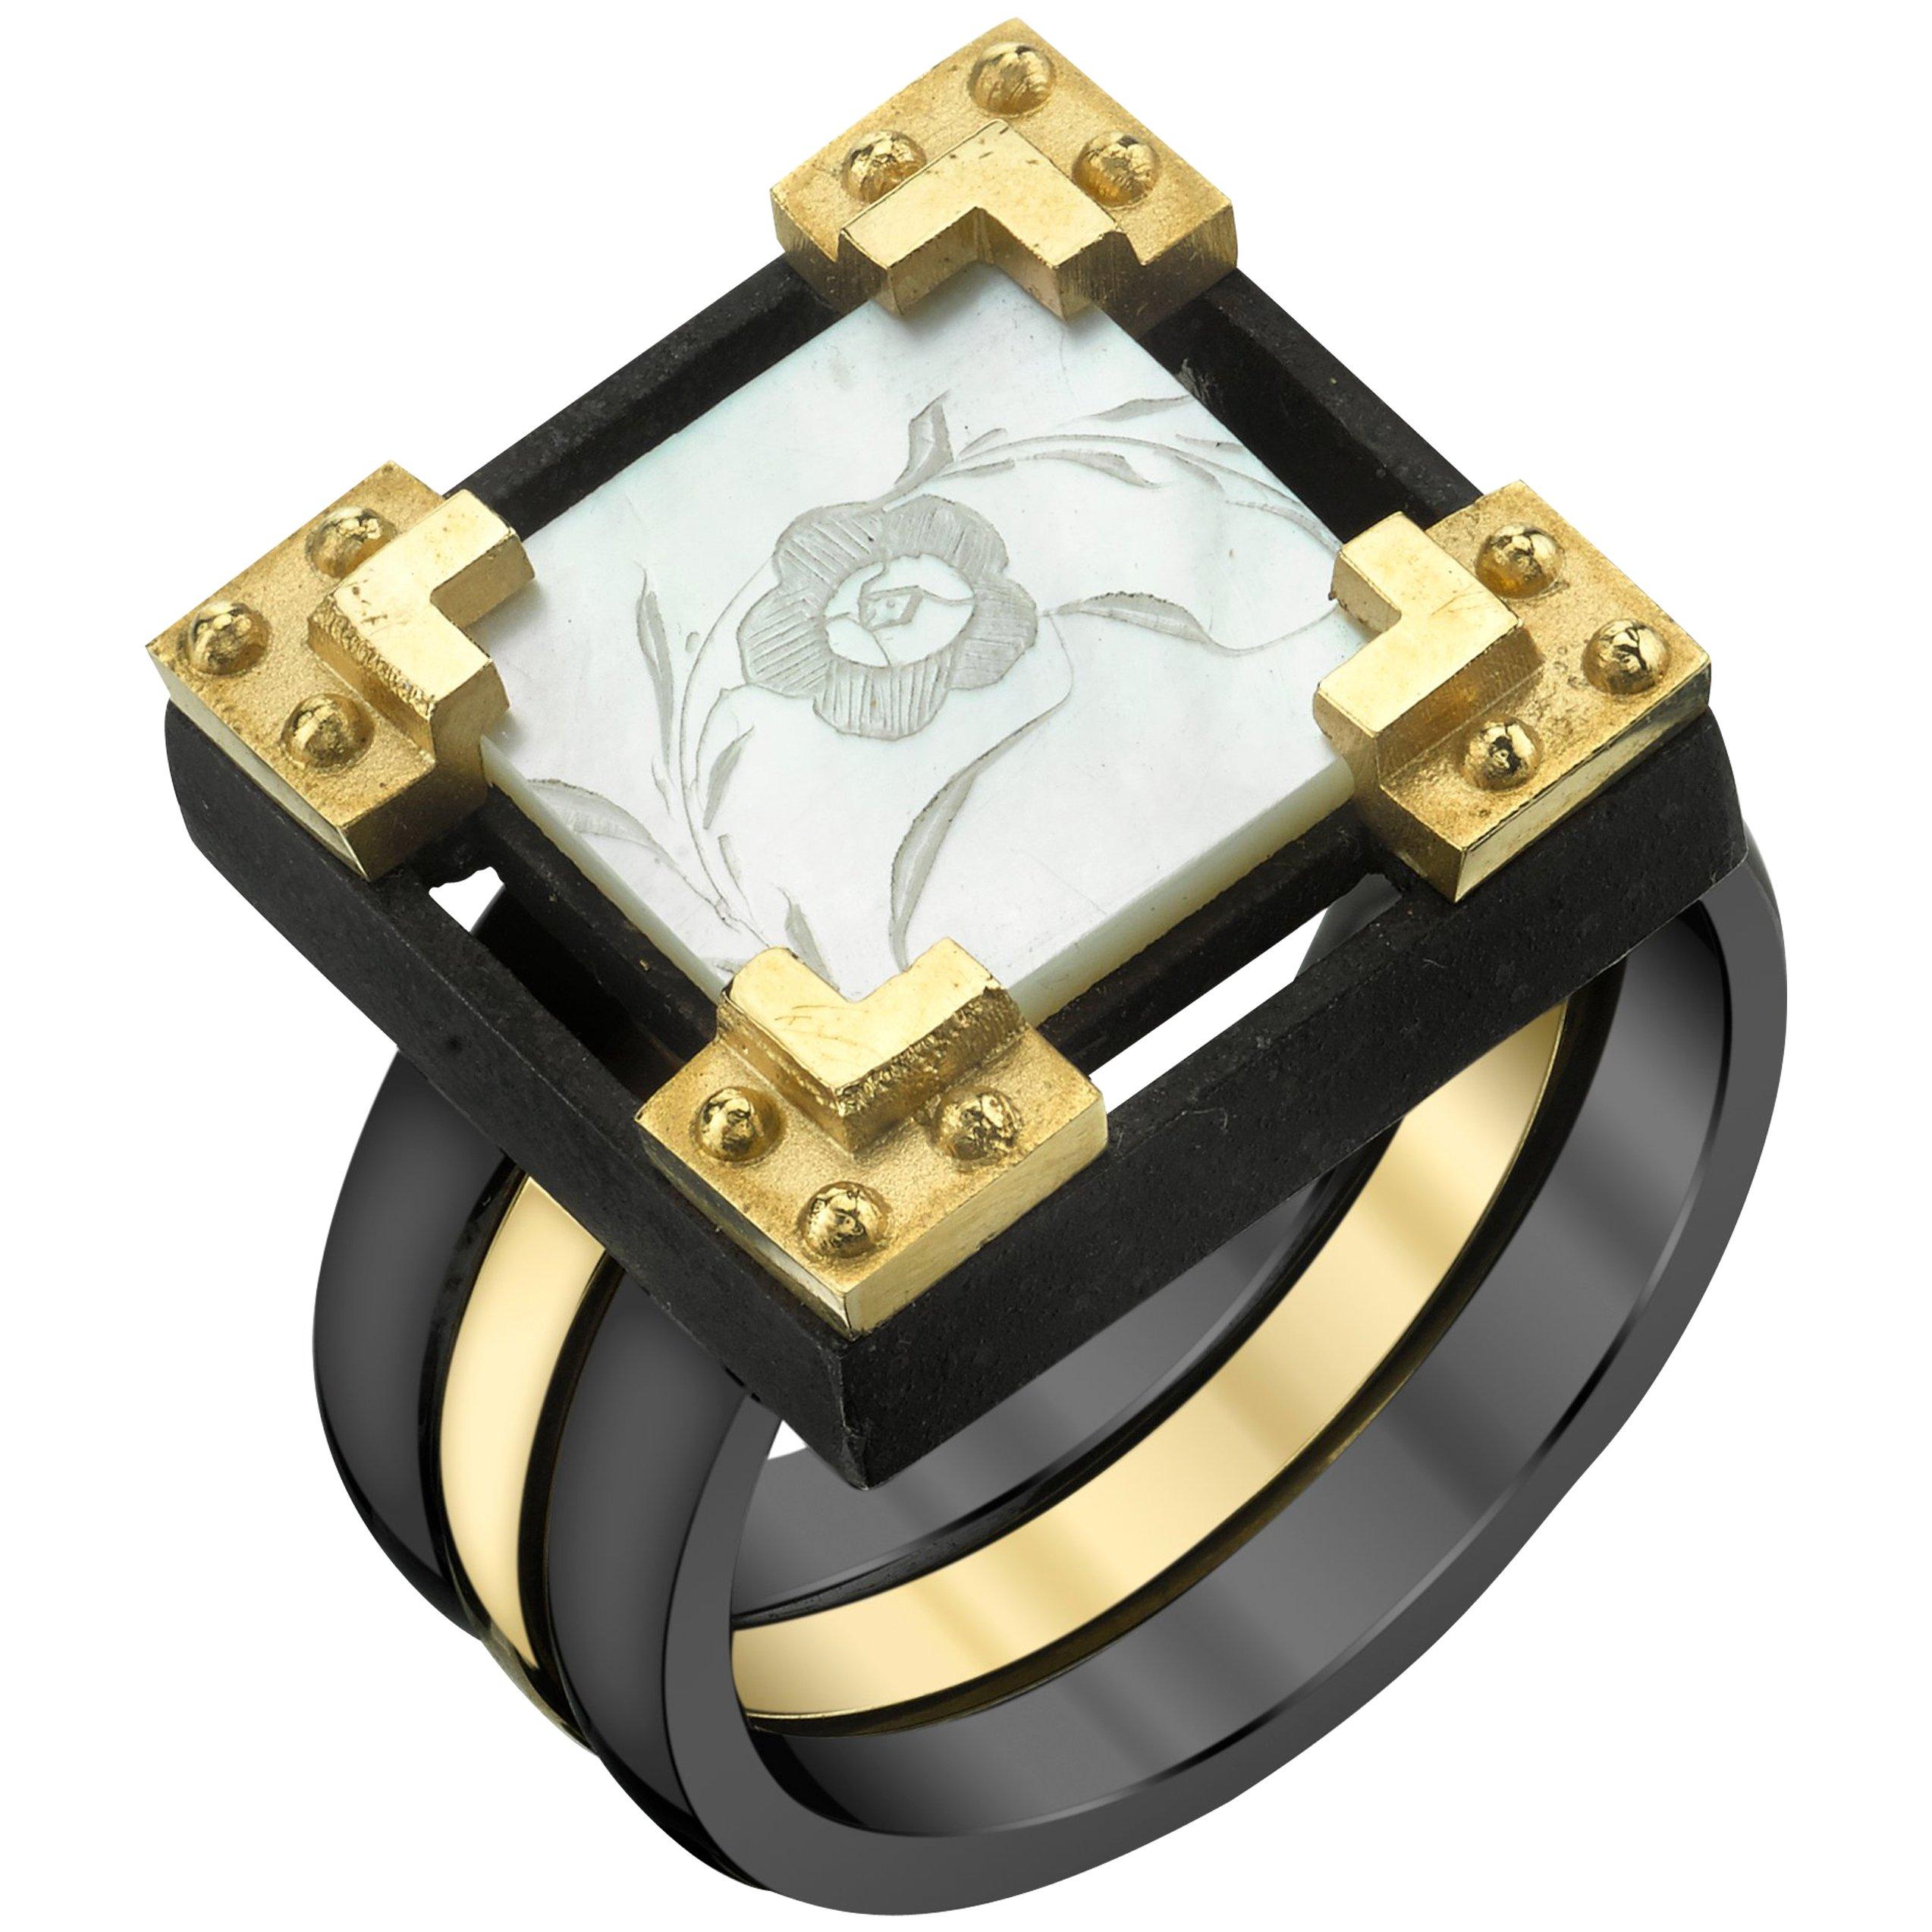 Antique Mother-of-Pearl Gaming Counter Ring in 18k Gold with Ceramic Bands